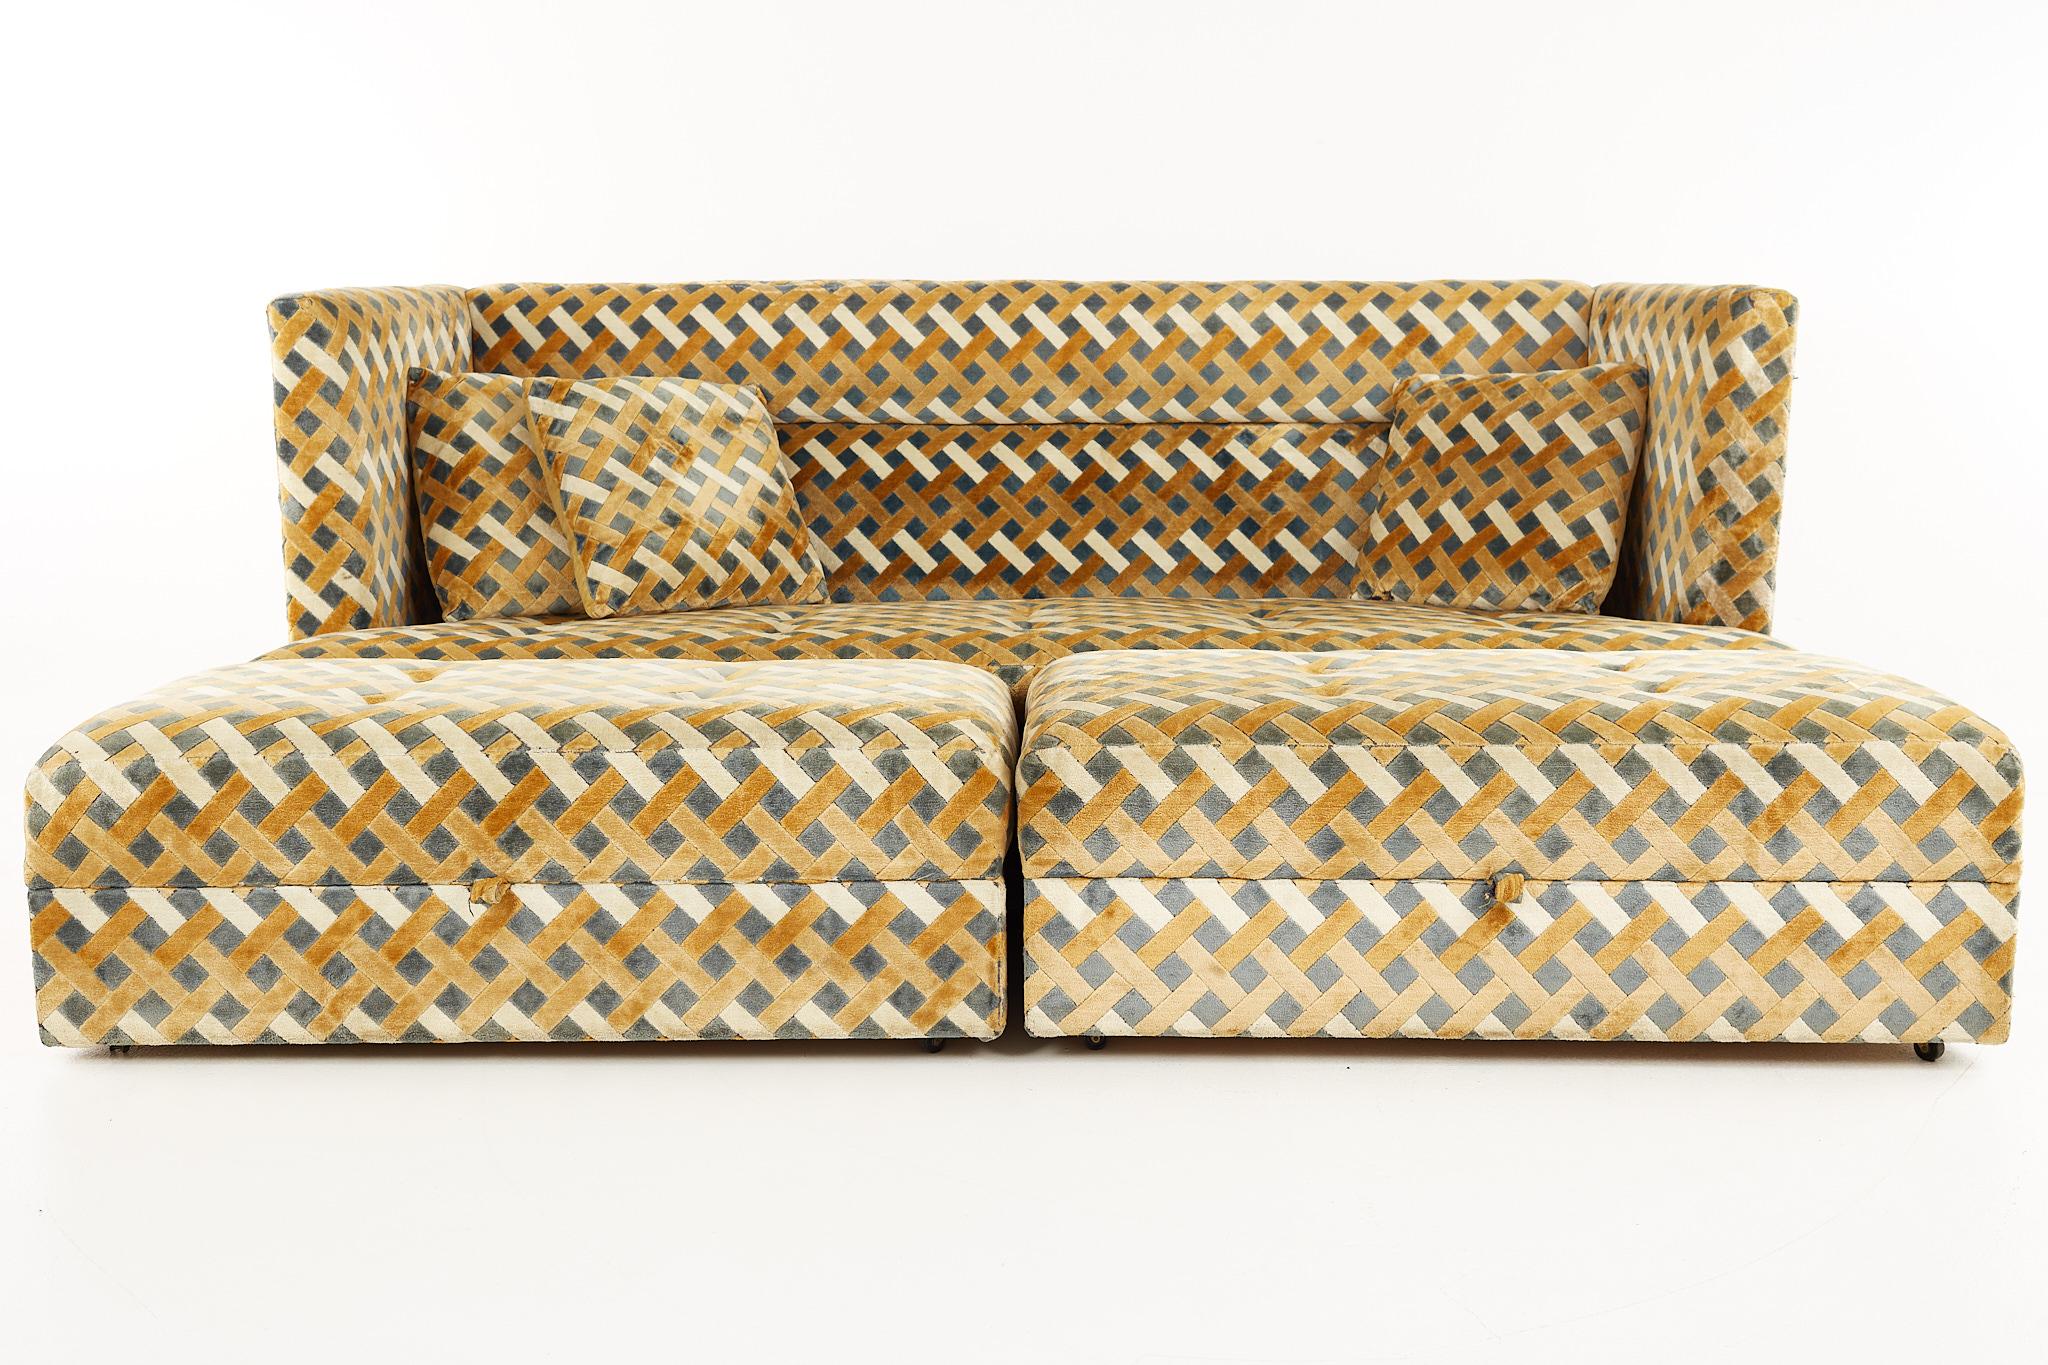 Milo Baughman mid-century shelter sofa and ottomans

The sofa measures: 90 wide x 44 deep x 37 high, with a seat height of 17 inches and arm height of 37 inches
Each ottoman measures: 44 wide x 23 deep x 16 high, with a seat height of 16